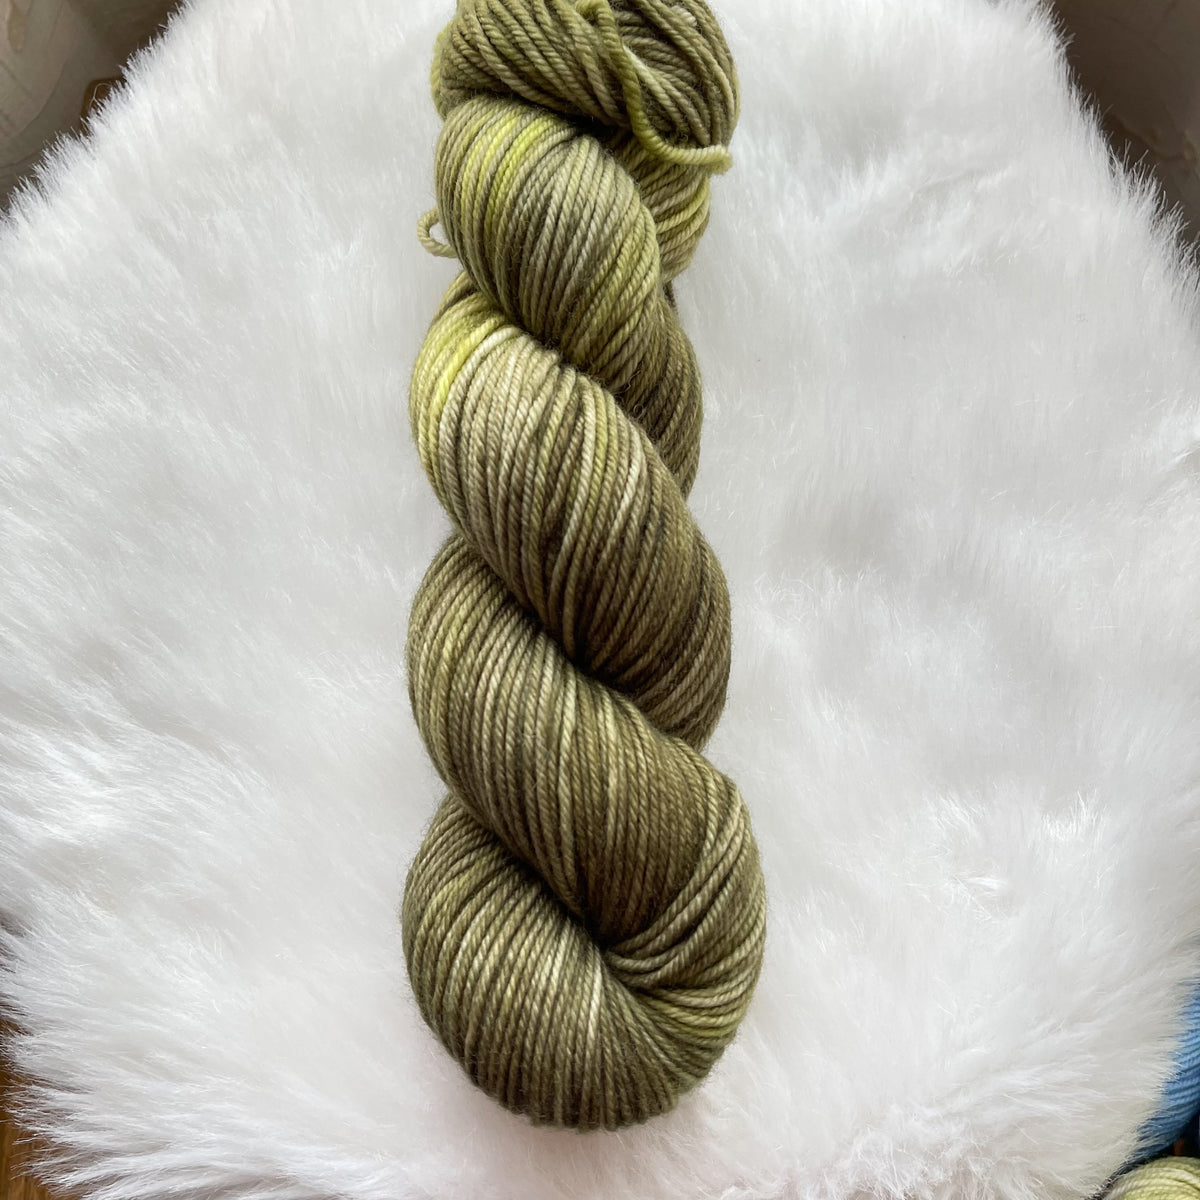 PICKLES  -Ready to Ship - Super DK- Hand Dyed Yarn Skein